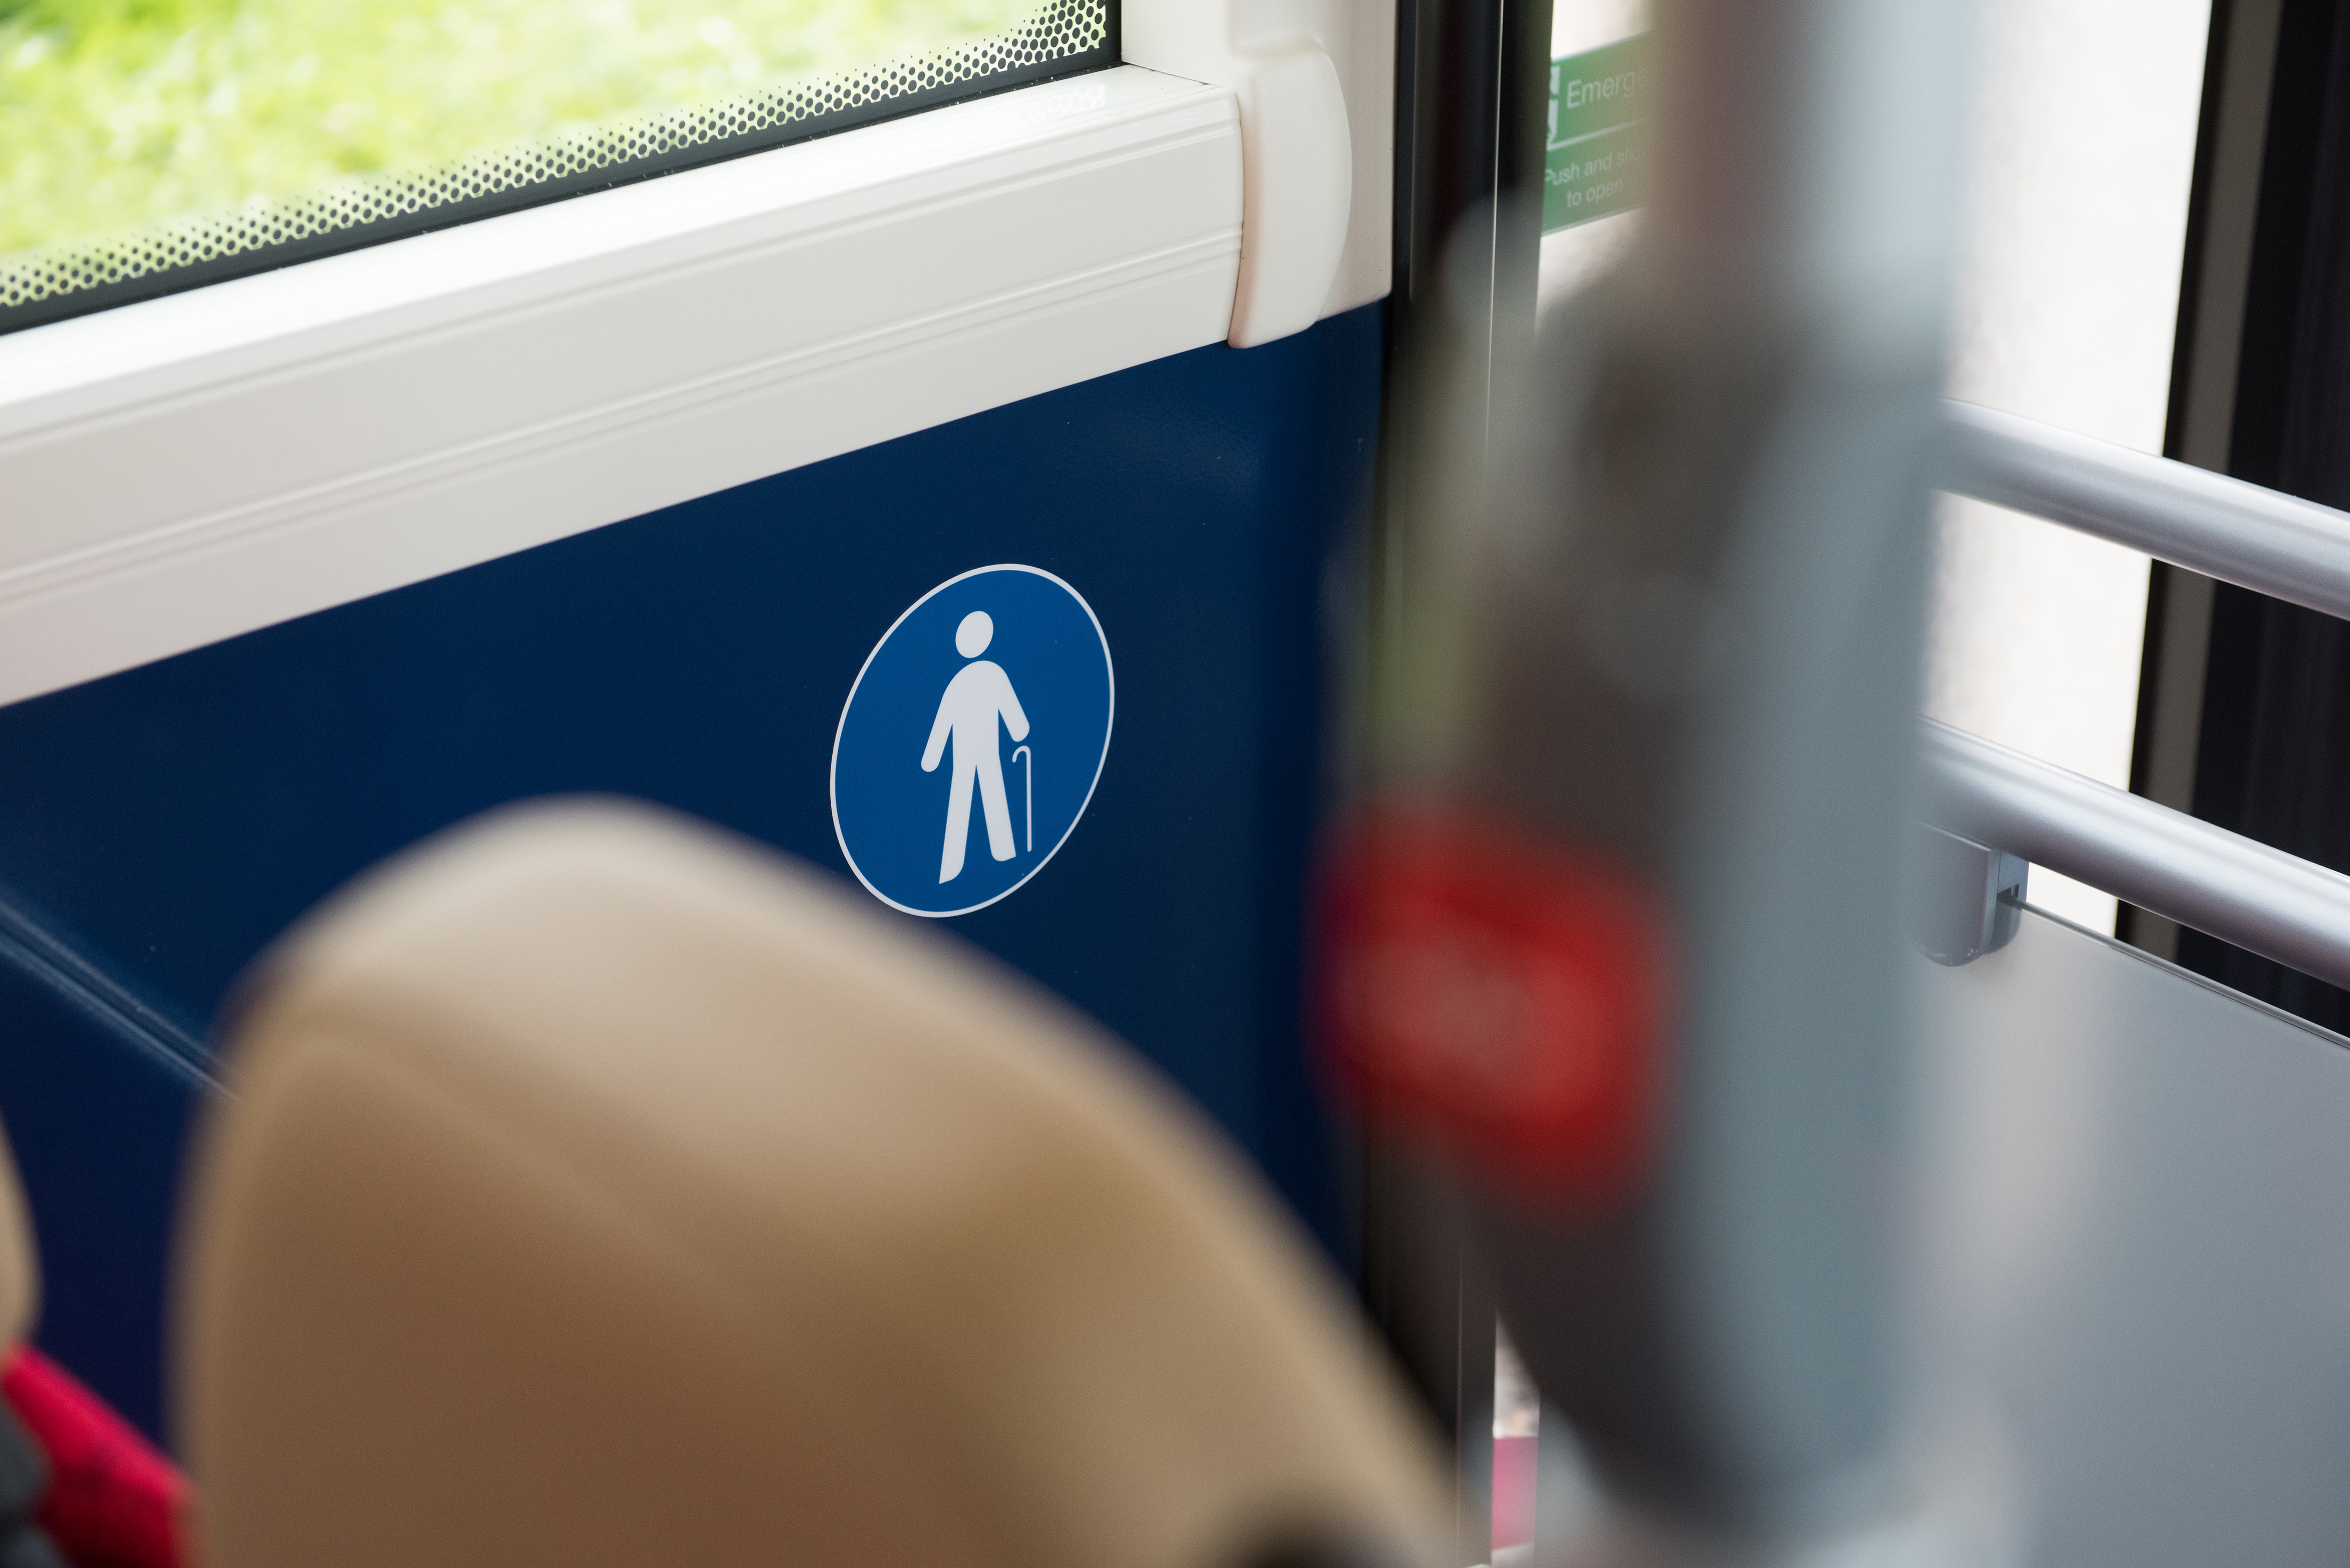 Accessible seating